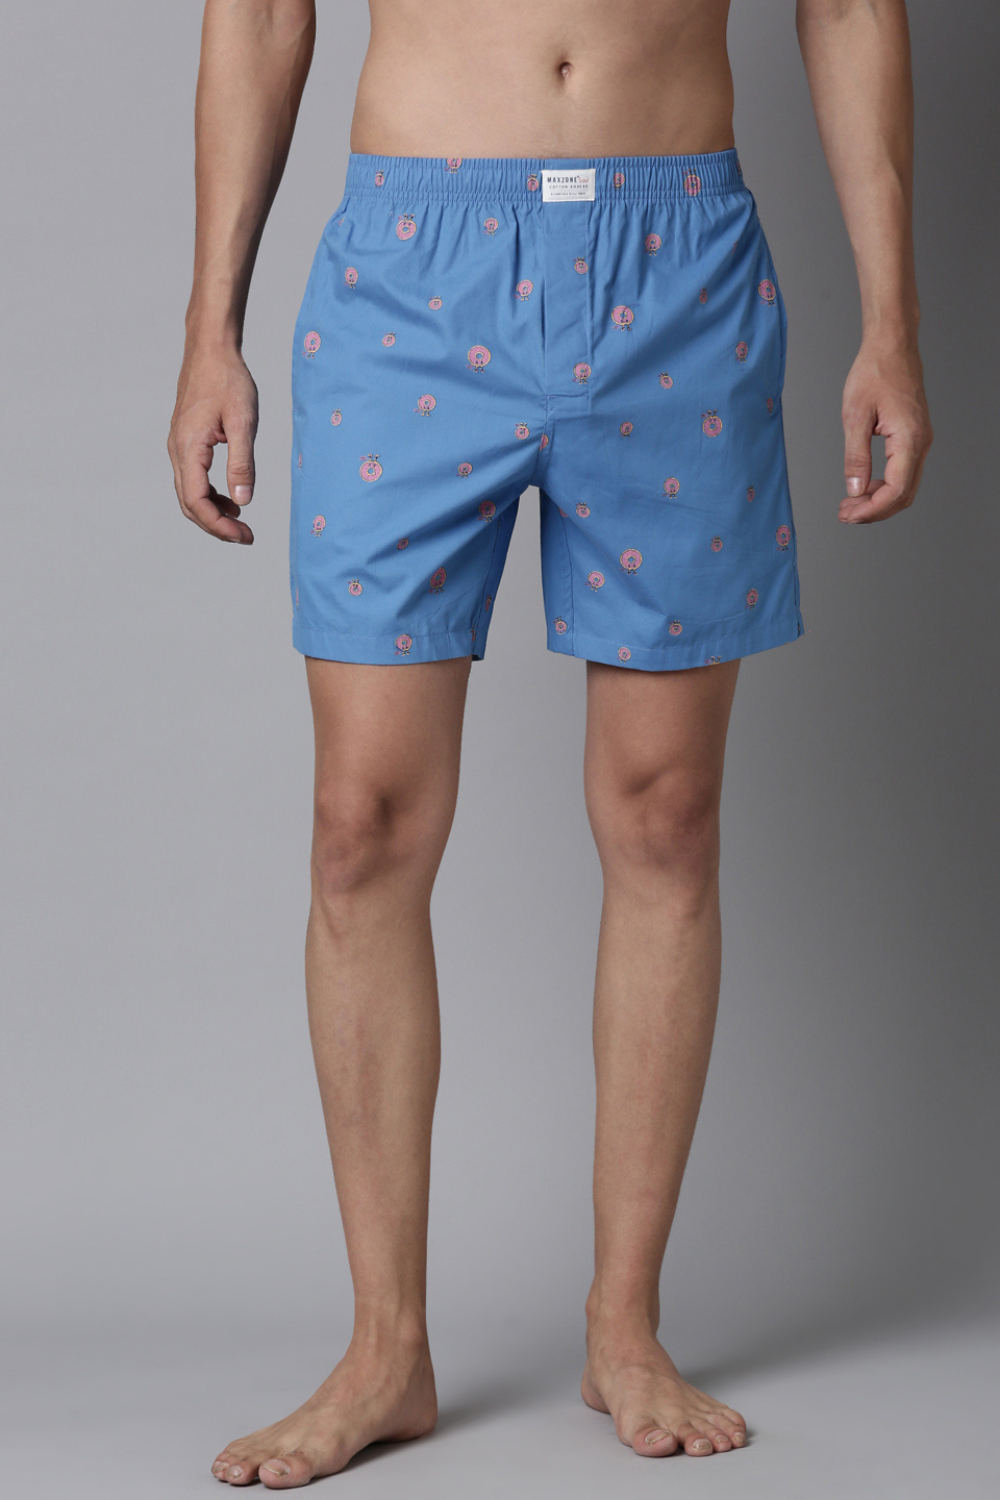 Blue-Lagoon Printed & Rich-Lilac Printed 365 Boxers Combo  Maxzone Clothing   